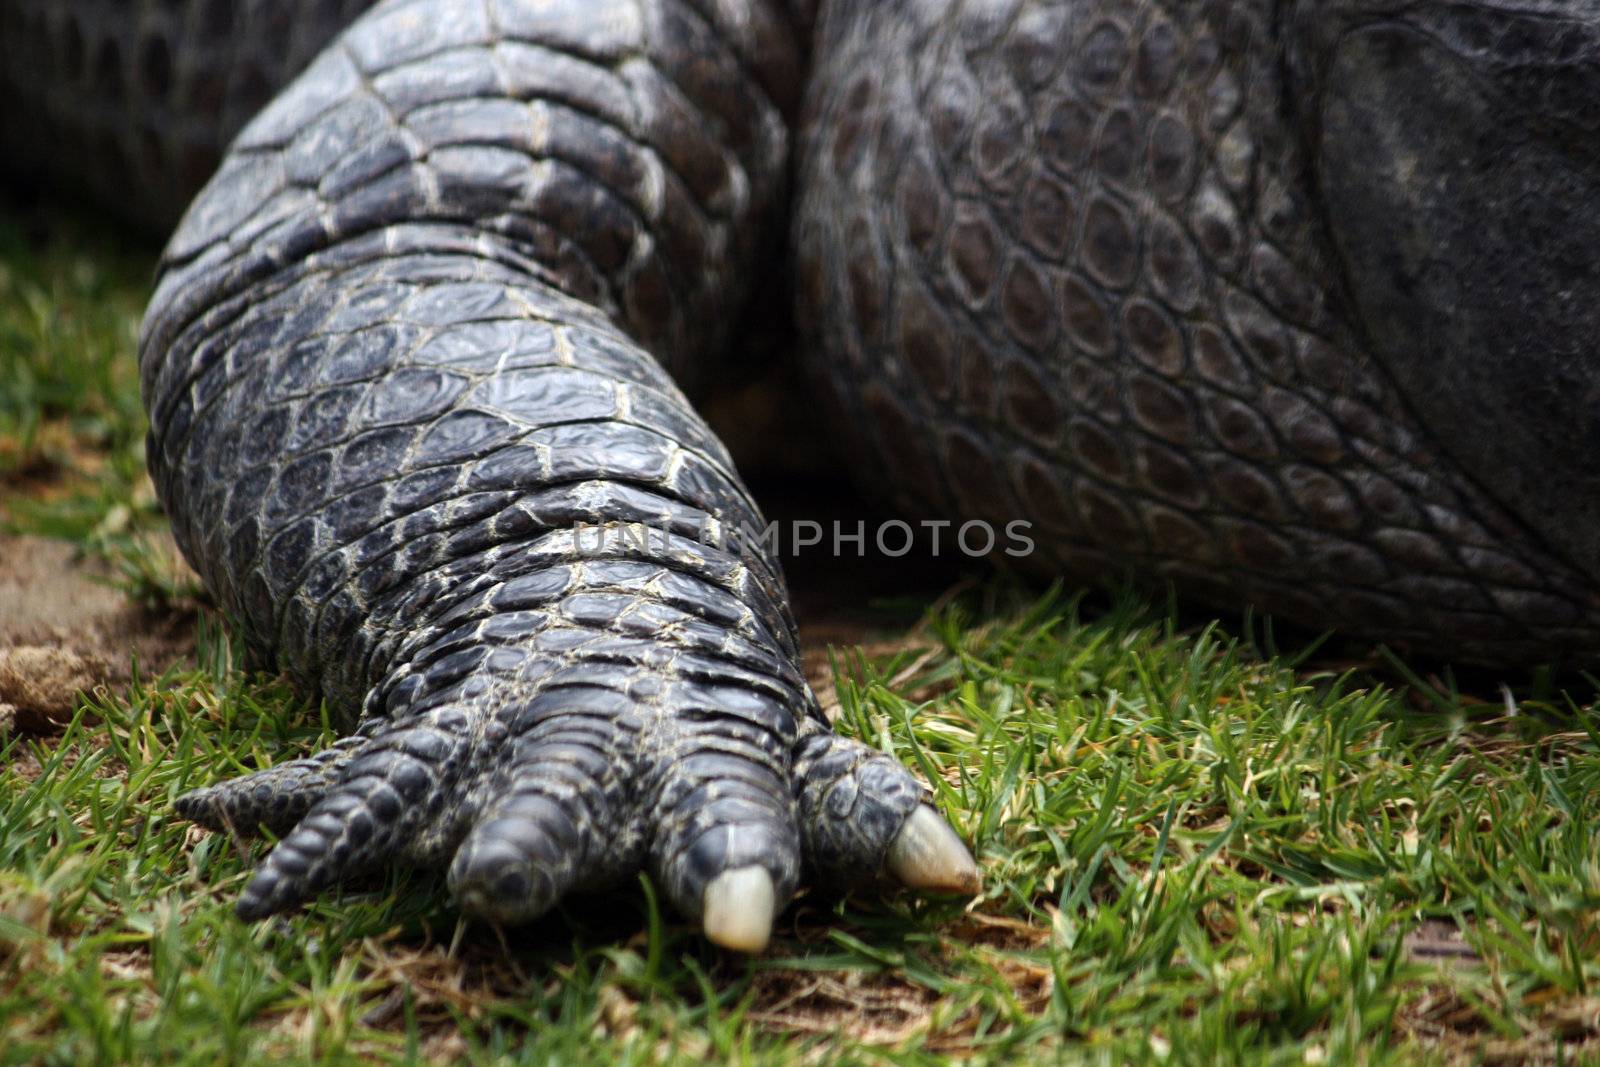 Close up view of the claw of a crocodile.